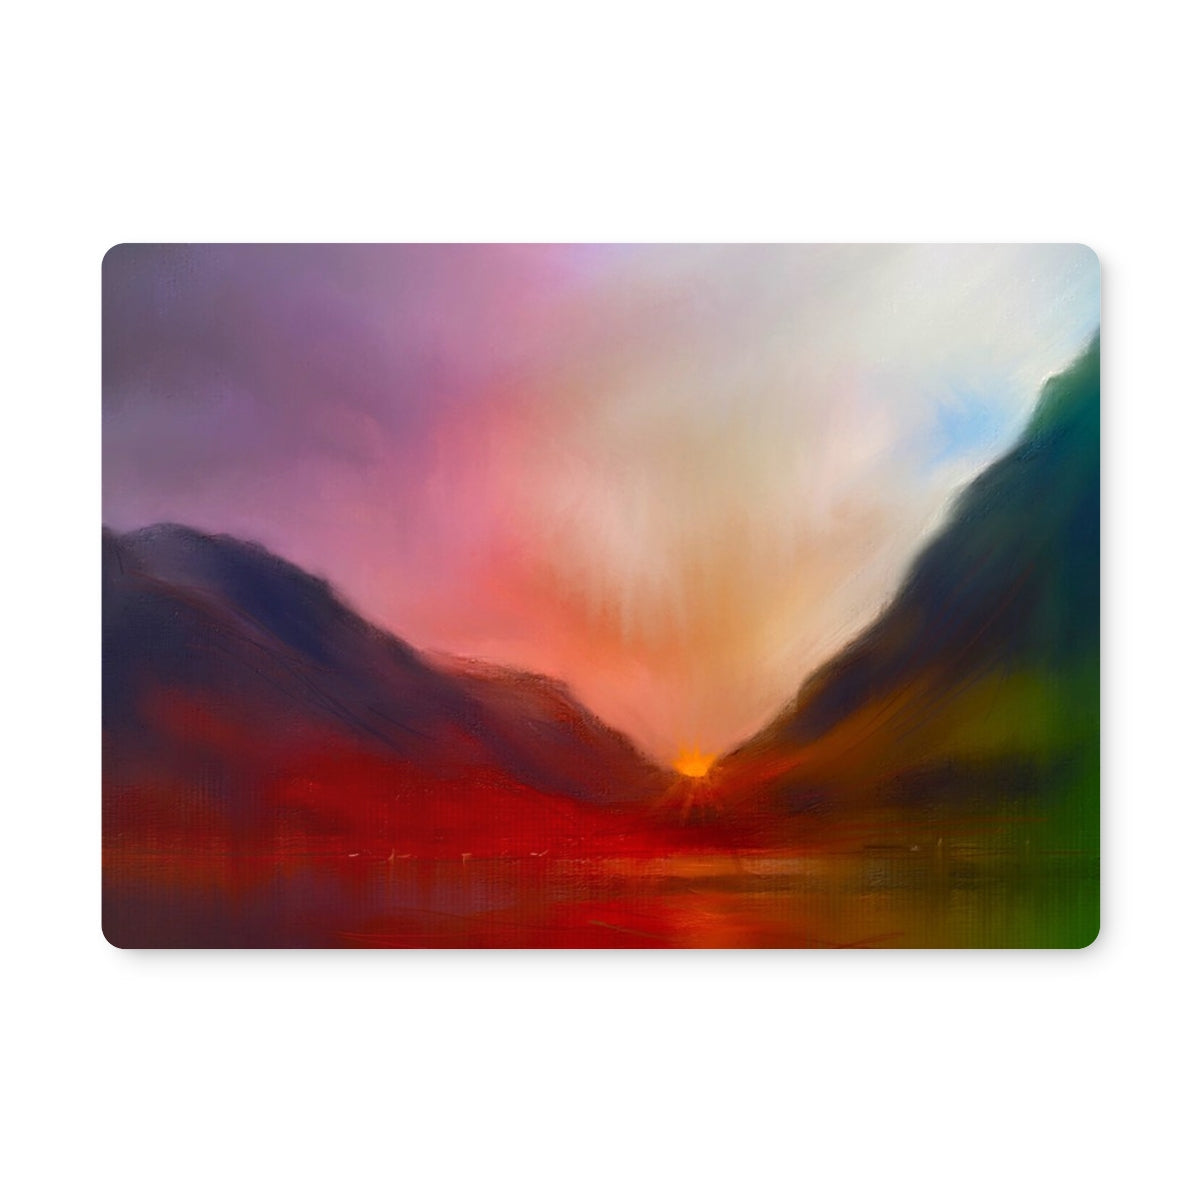 Glencoe Sunset Art Gifts Placemat-Placemats-Glencoe Art Gallery-Single Placemat-Paintings, Prints, Homeware, Art Gifts From Scotland By Scottish Artist Kevin Hunter